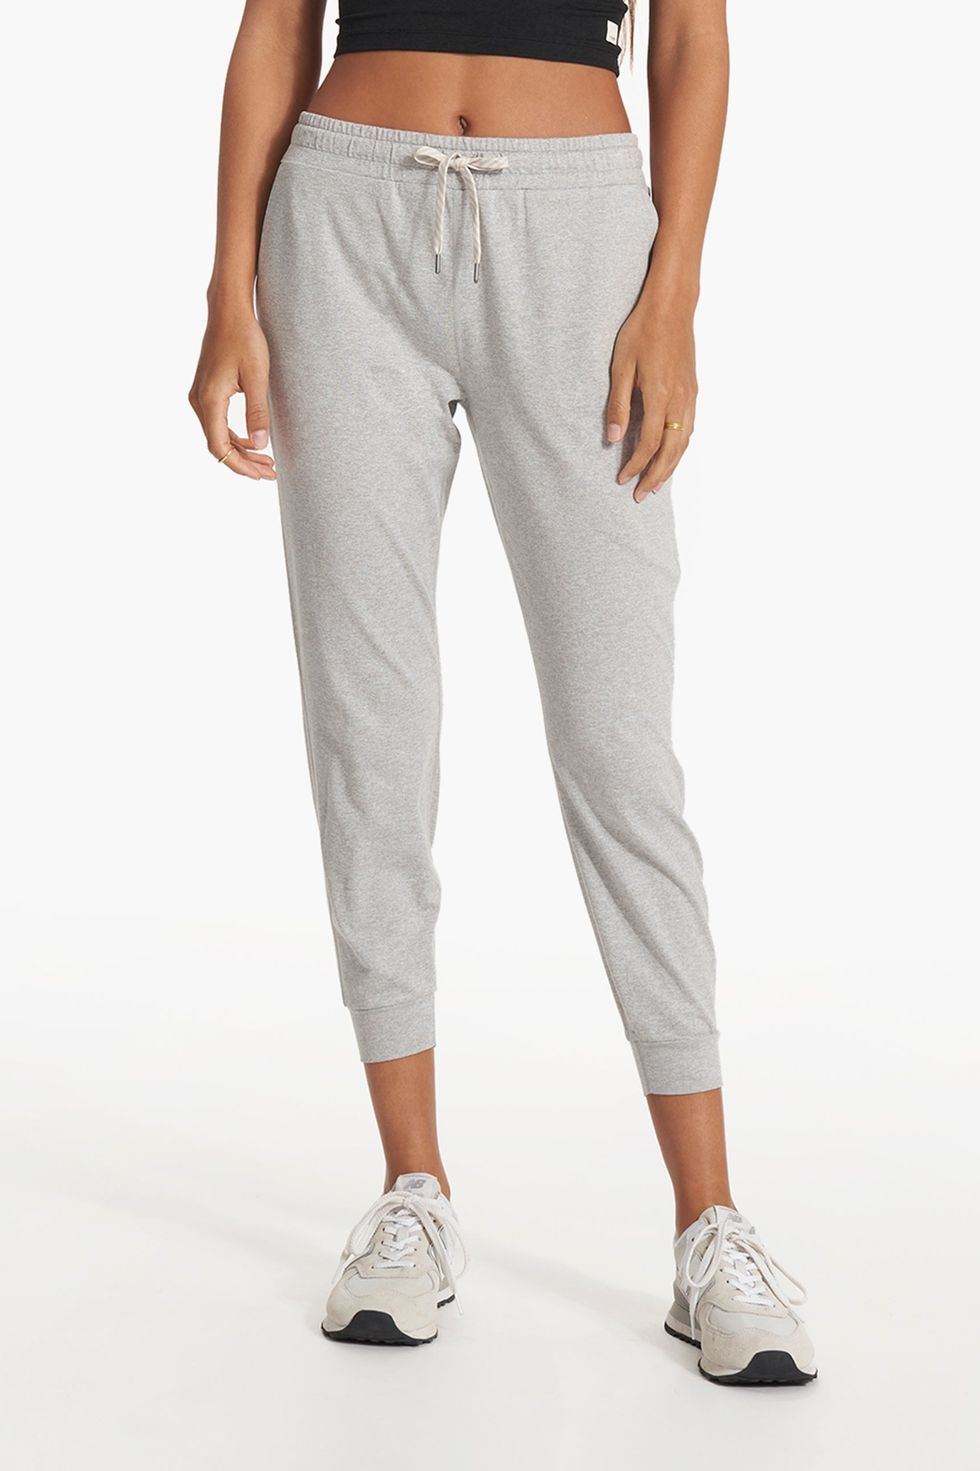 Women's Joggers with Pockets Lightweight Athletic Sweatpants - Light Grey /  XS